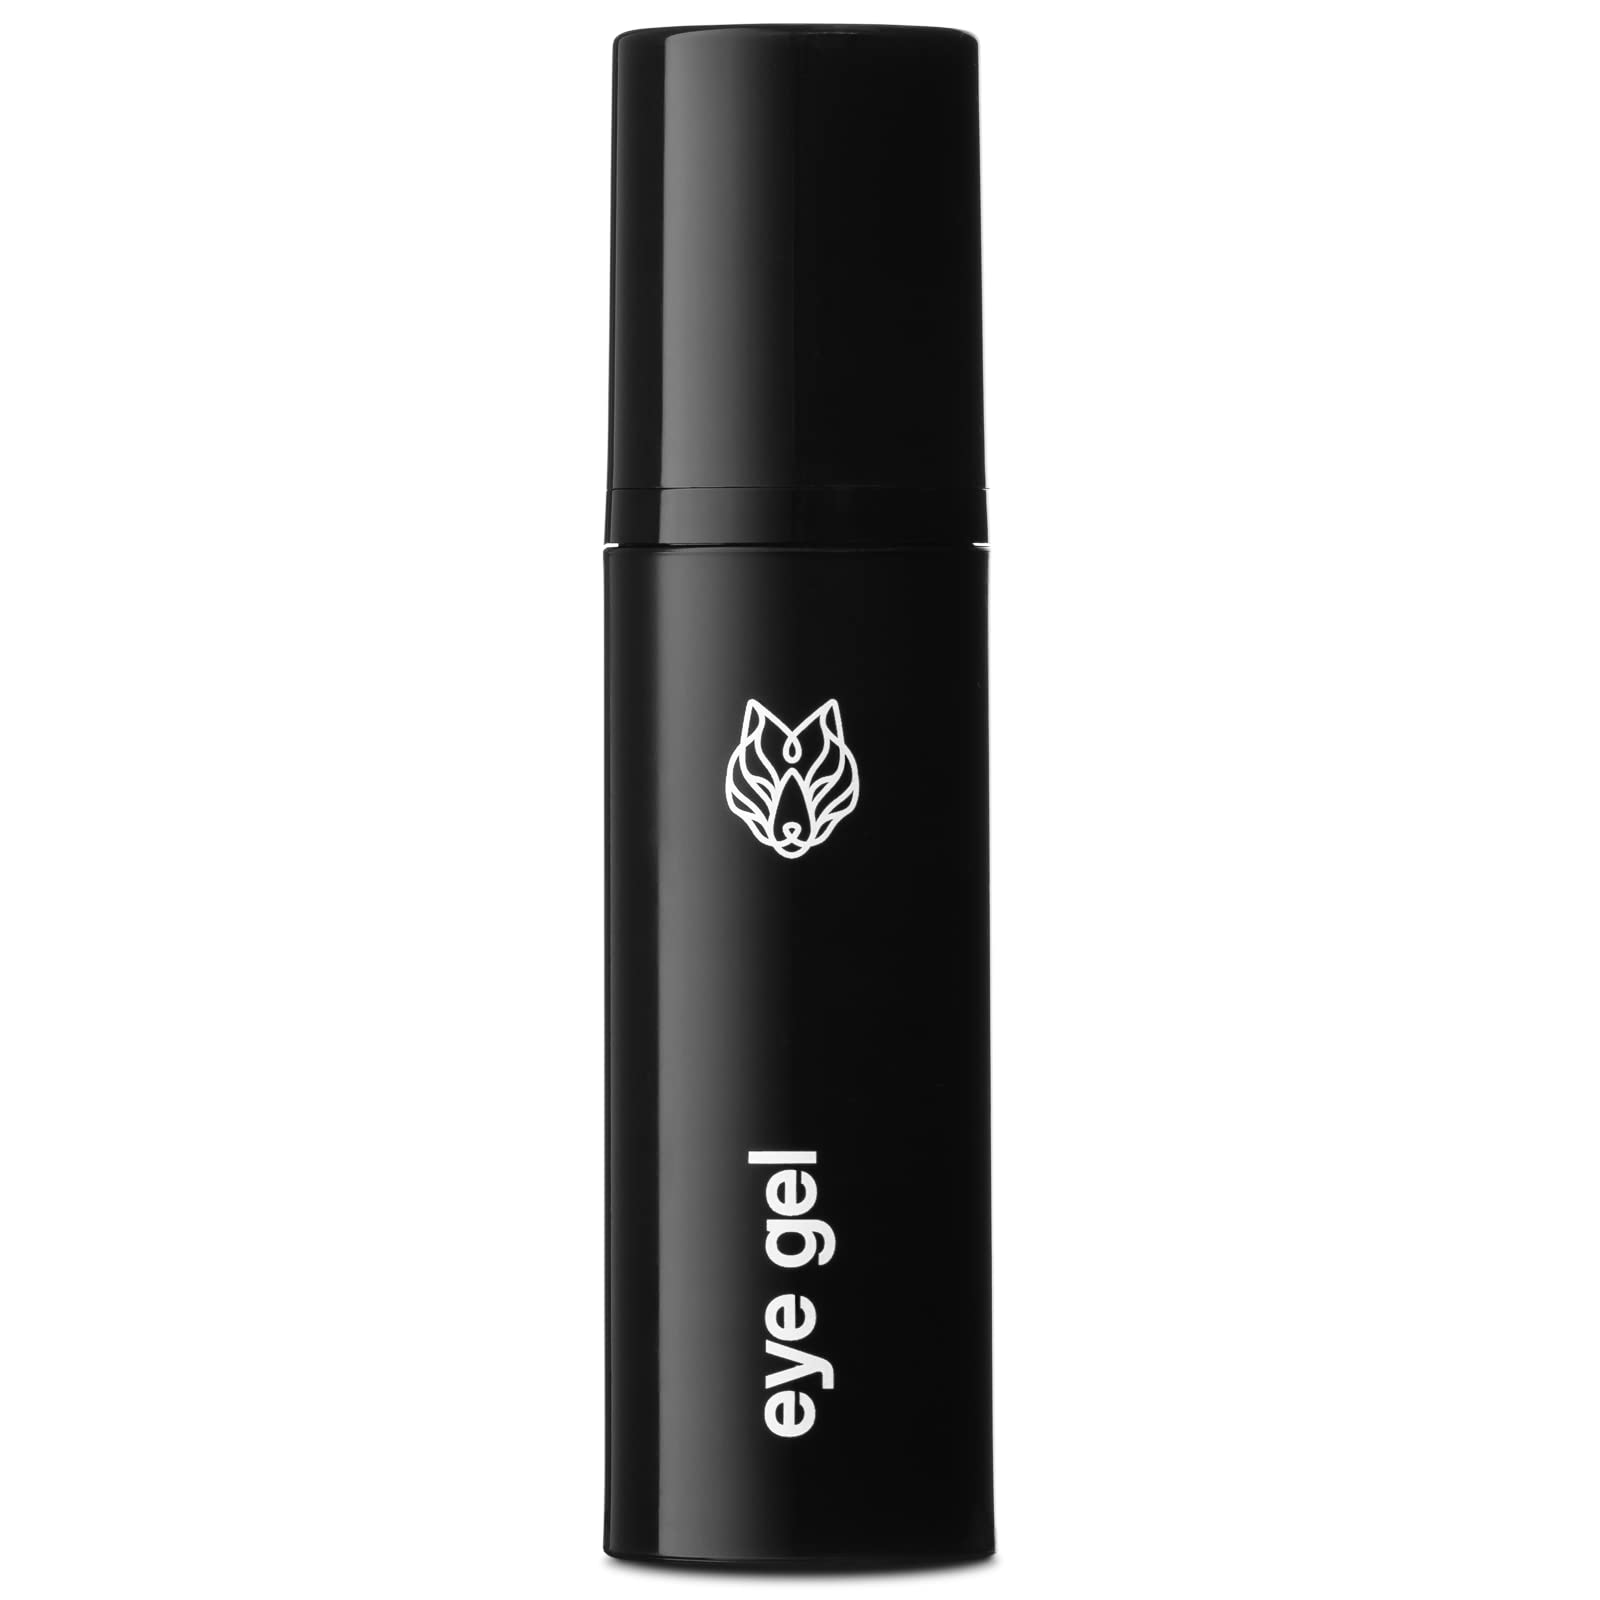 Black Wolf - Double Duty Glacier Eye Gel- 1 Fl Oz- Caffeine Improves the Appearance of Dark Circles and Under Eye Bags- Invigorating Glacier Formula Wakes Up Your Eyes, Great for Men